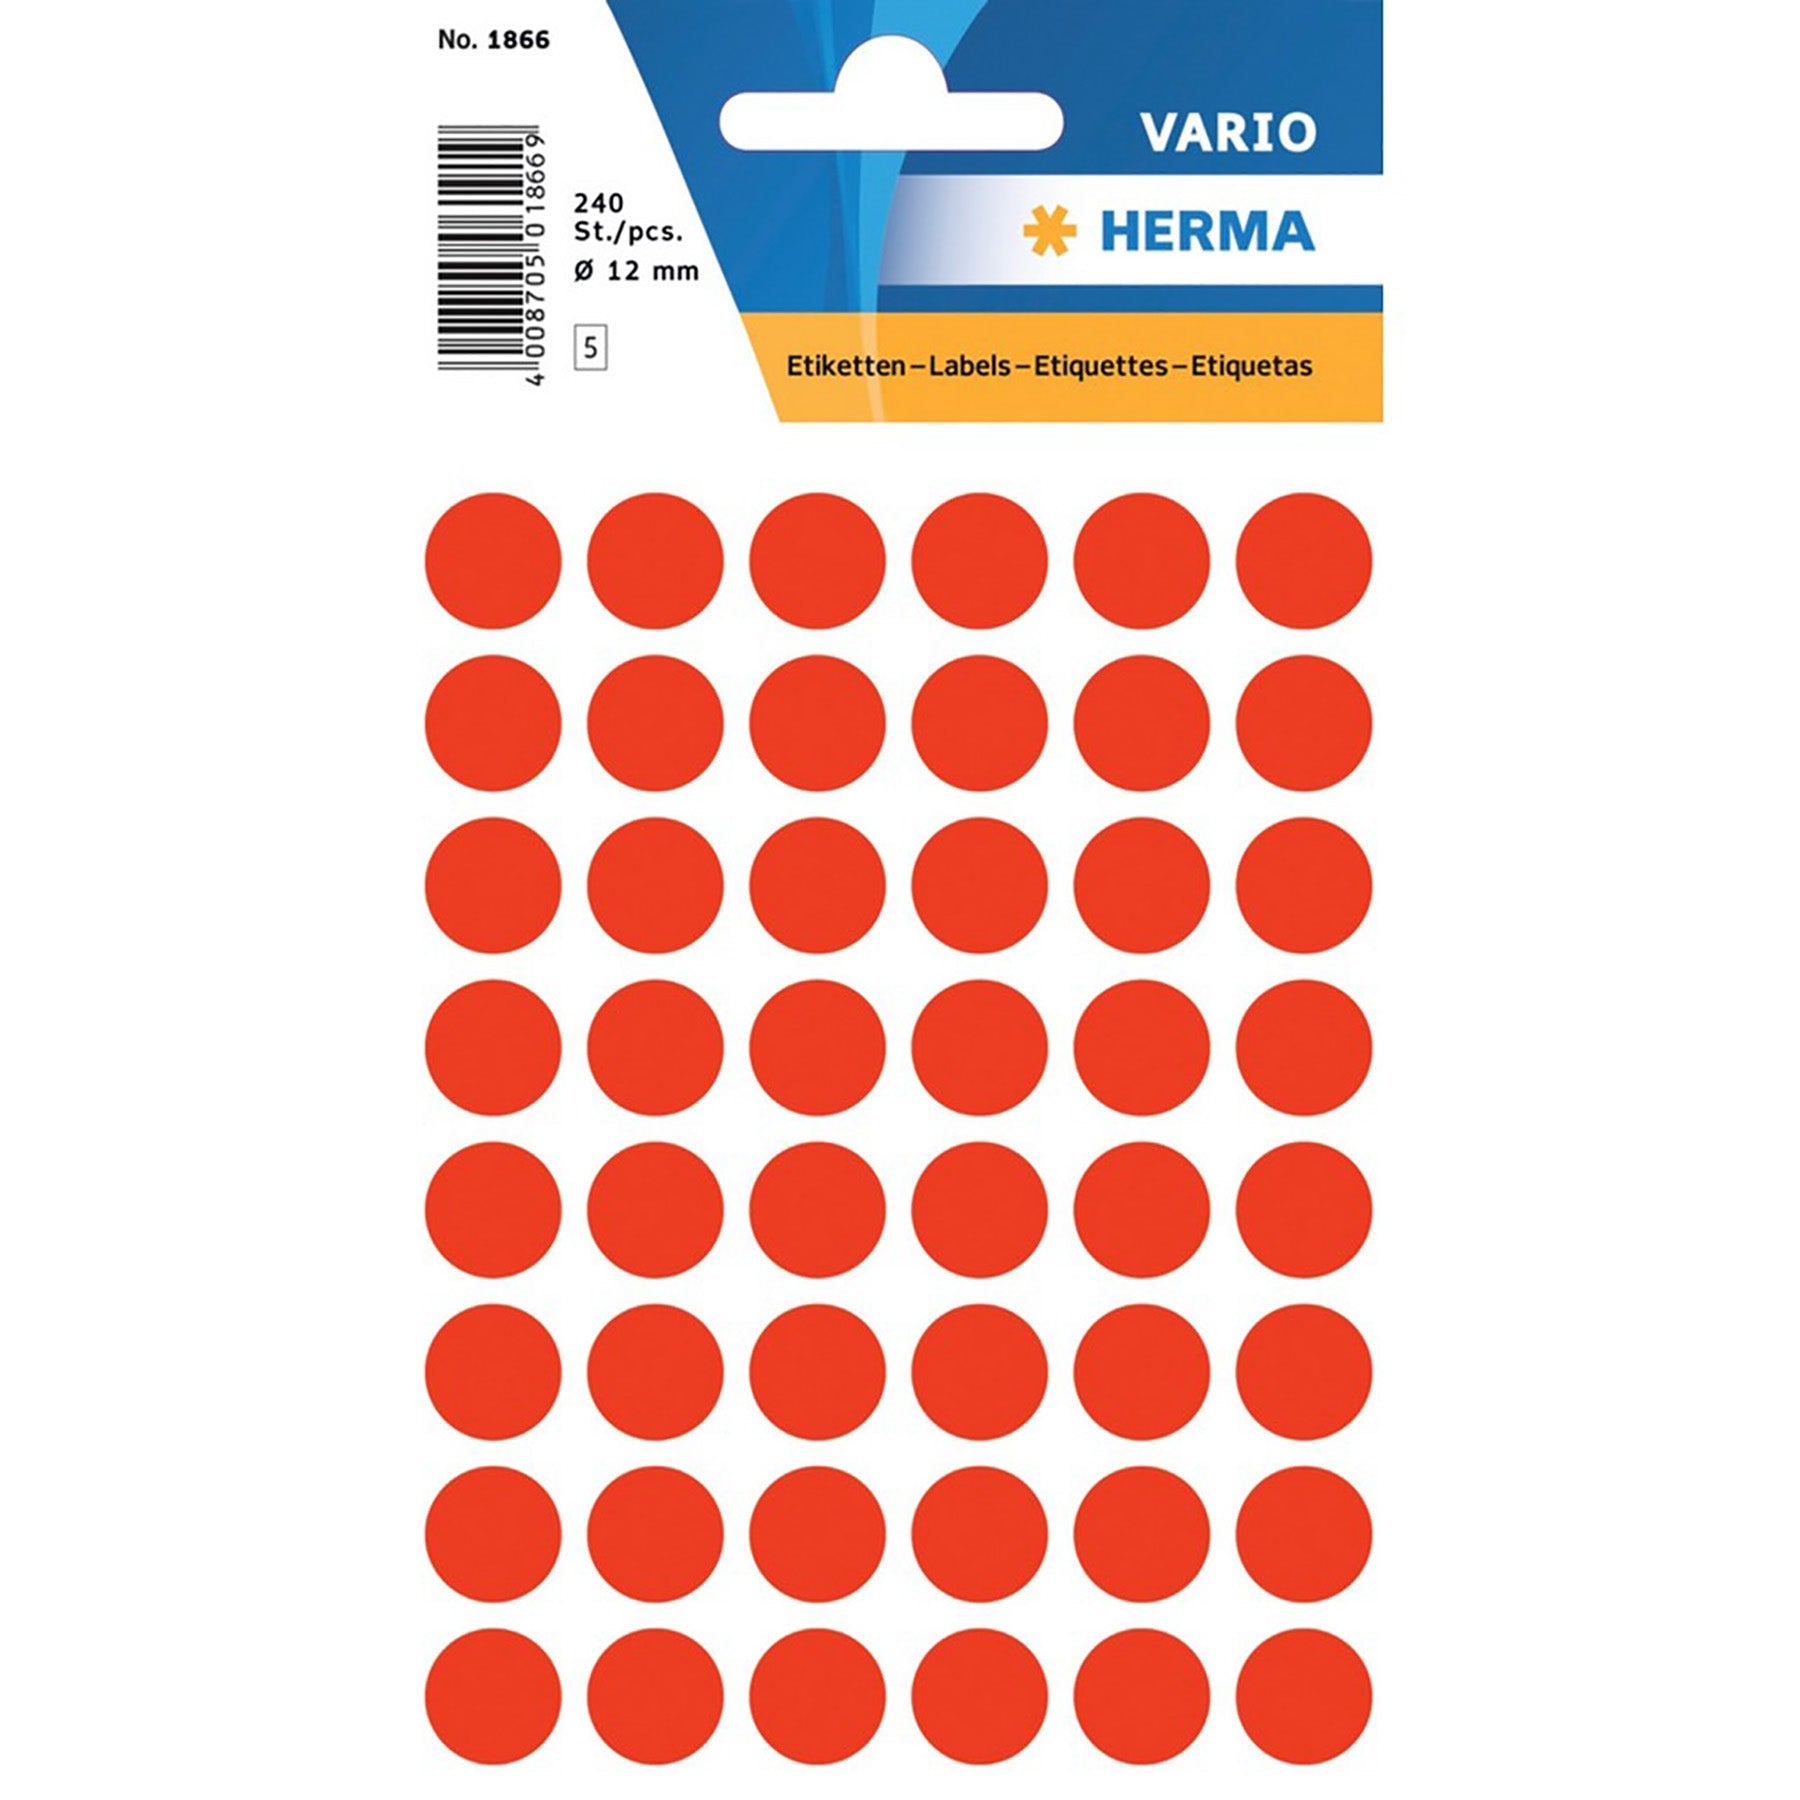 Herma Vario 5 Sheets Colour-Coding Round Labels Dots, Fluo Red 0.47in